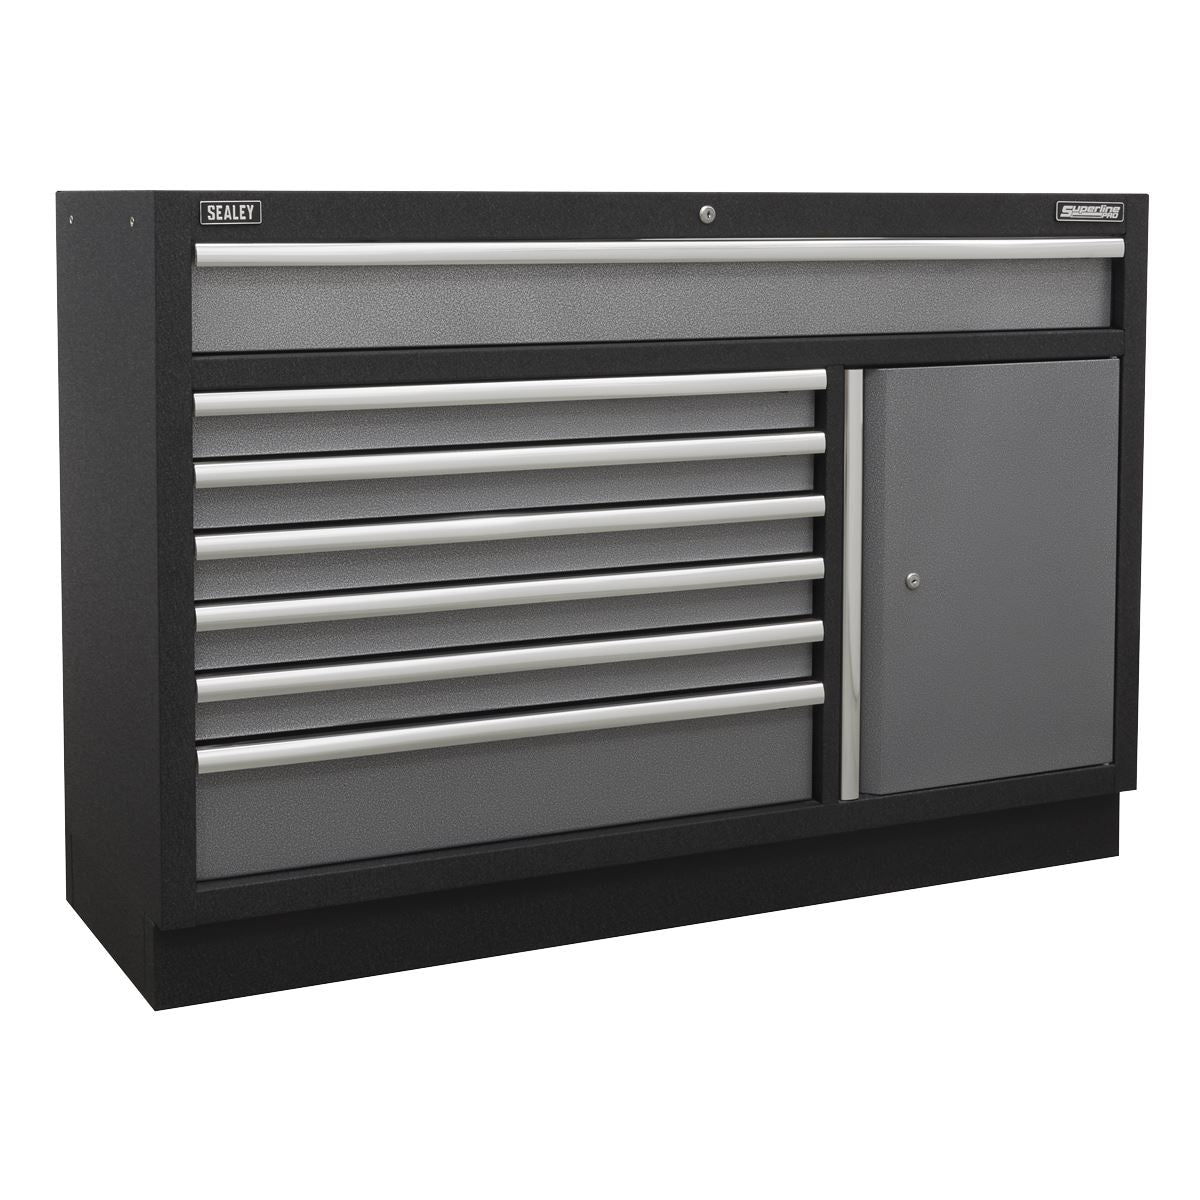 Sealey Modular Storage System Combo - Stainless Steel Worktop APMSSTACK14SS